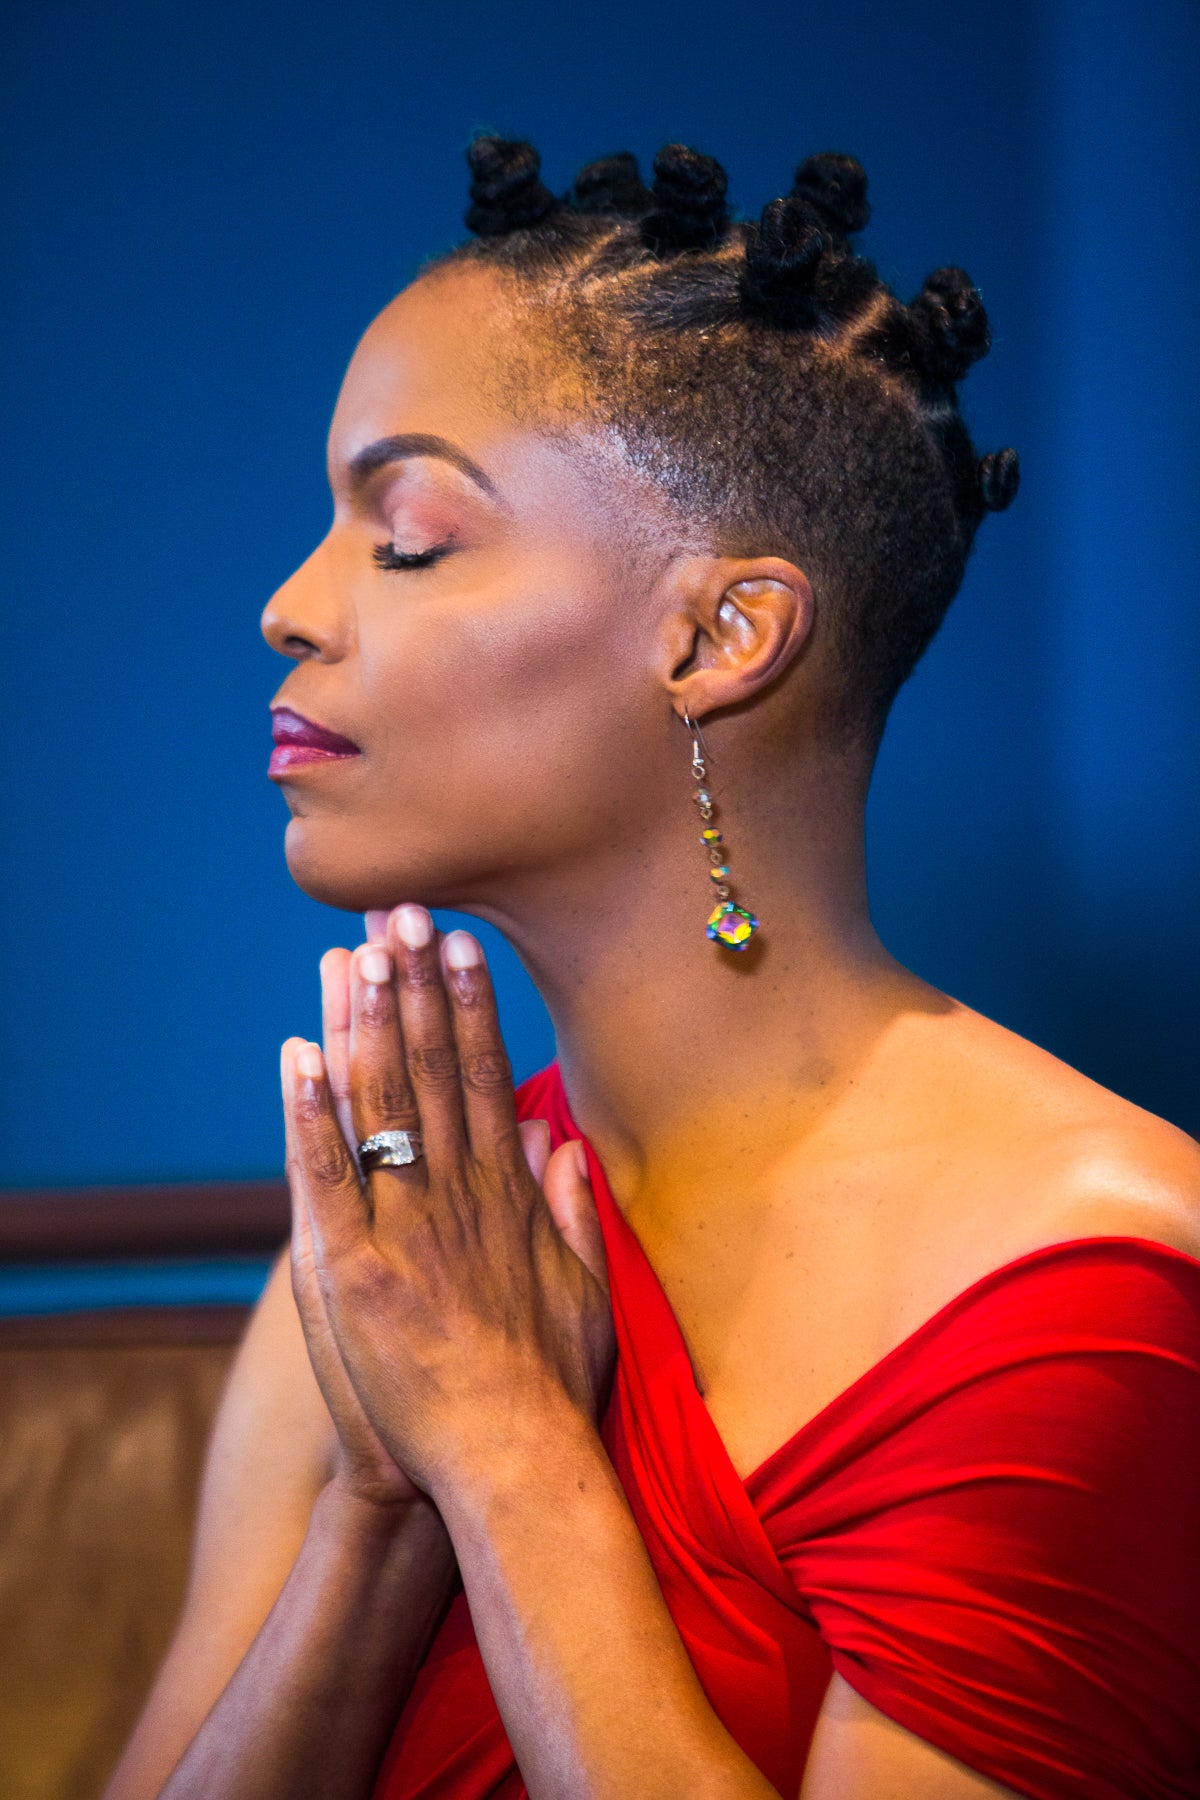 Jazz Singer Nnenna Freelon Chronicles Coping With Loss In ‘Great Grief’ Podcast And New Album